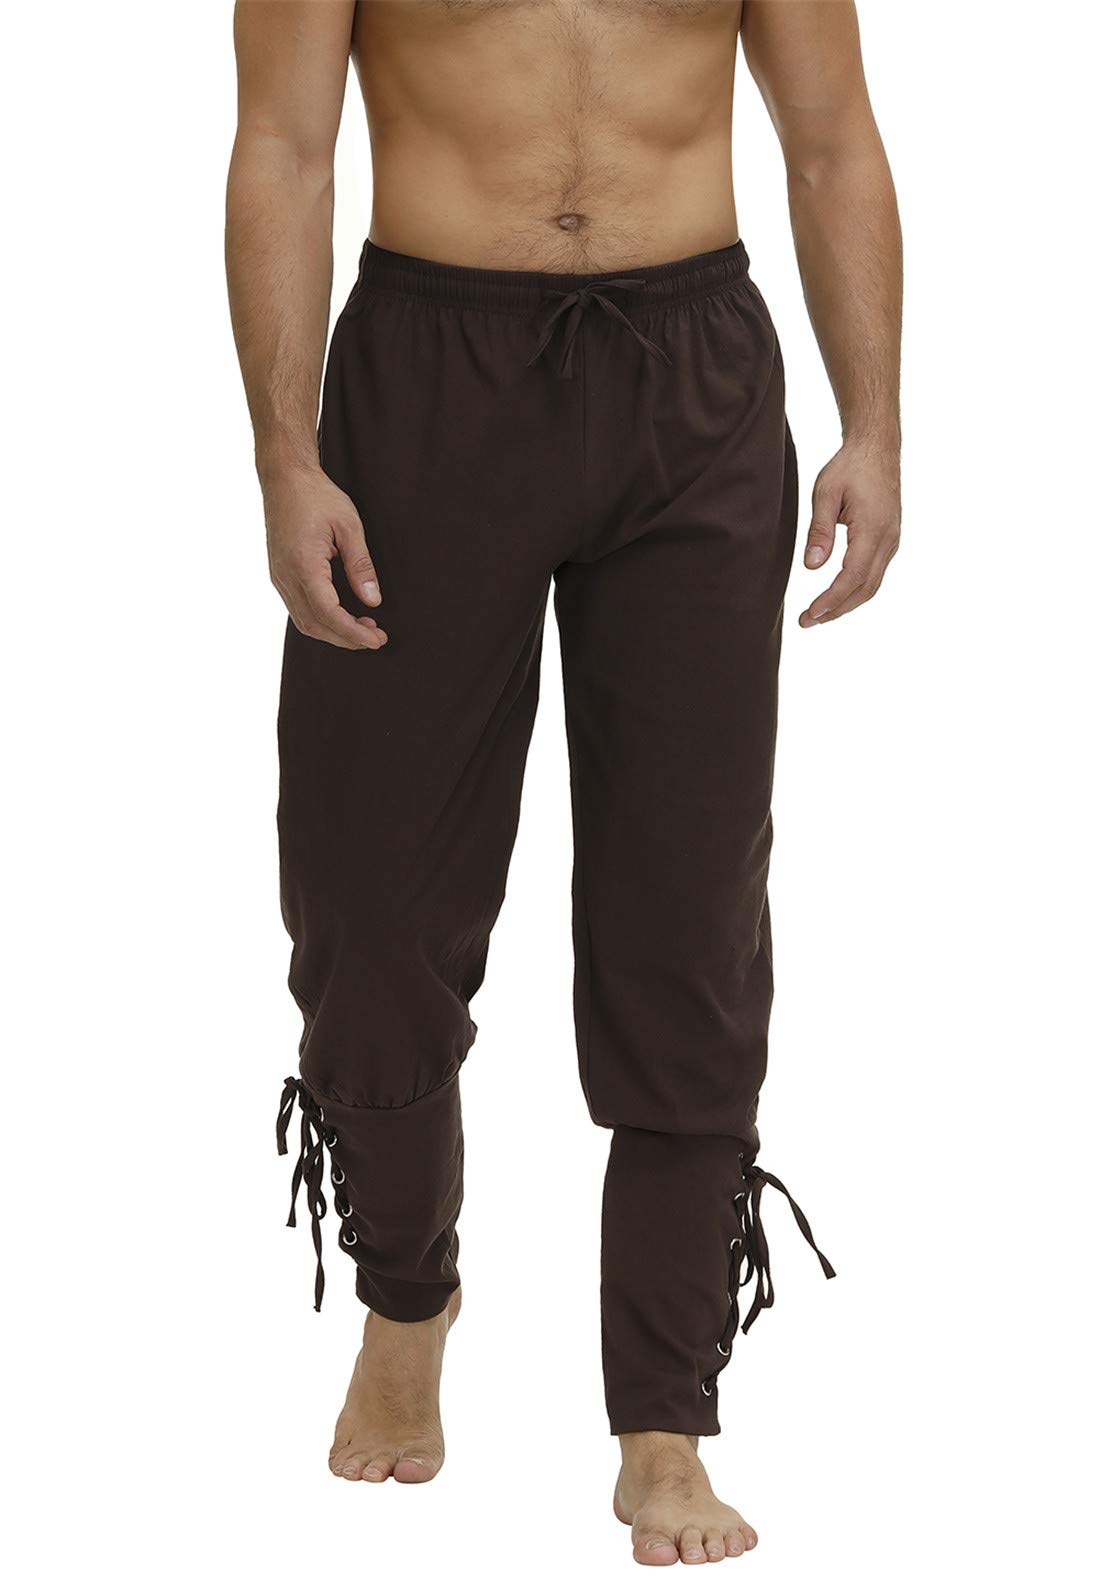 Men's Ankle Banded Cuff Renaissance Pants Medieval Viking Navigator Trousers Pirate Cosplay Costume with Drawstrings 2X-Large Brown